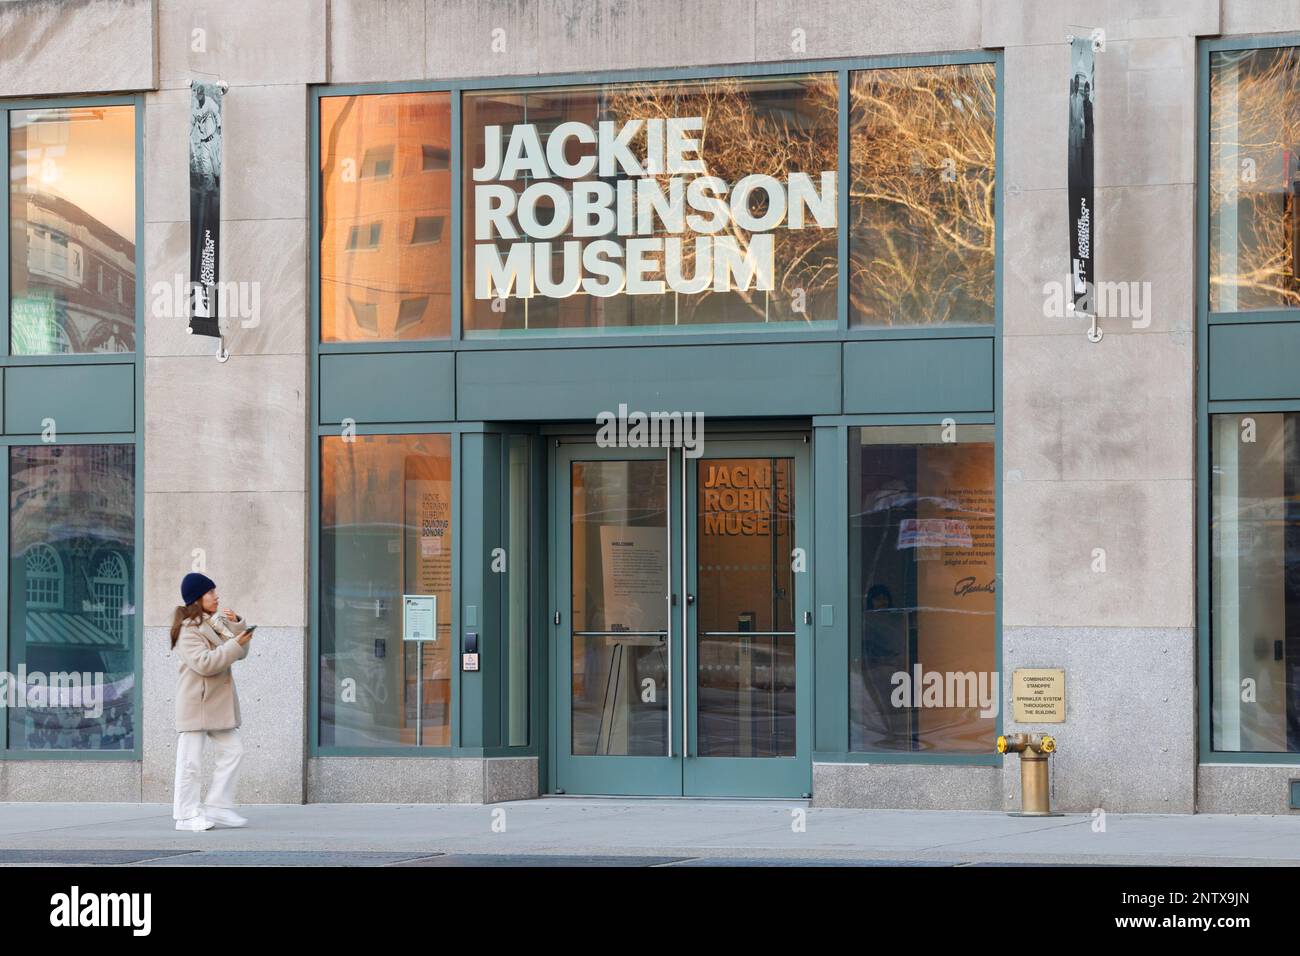 Jackie Robinson Museum, 75 Varick St, New York. NYC storefront photo of a sports museum in Lower Manhattan. Stock Photo